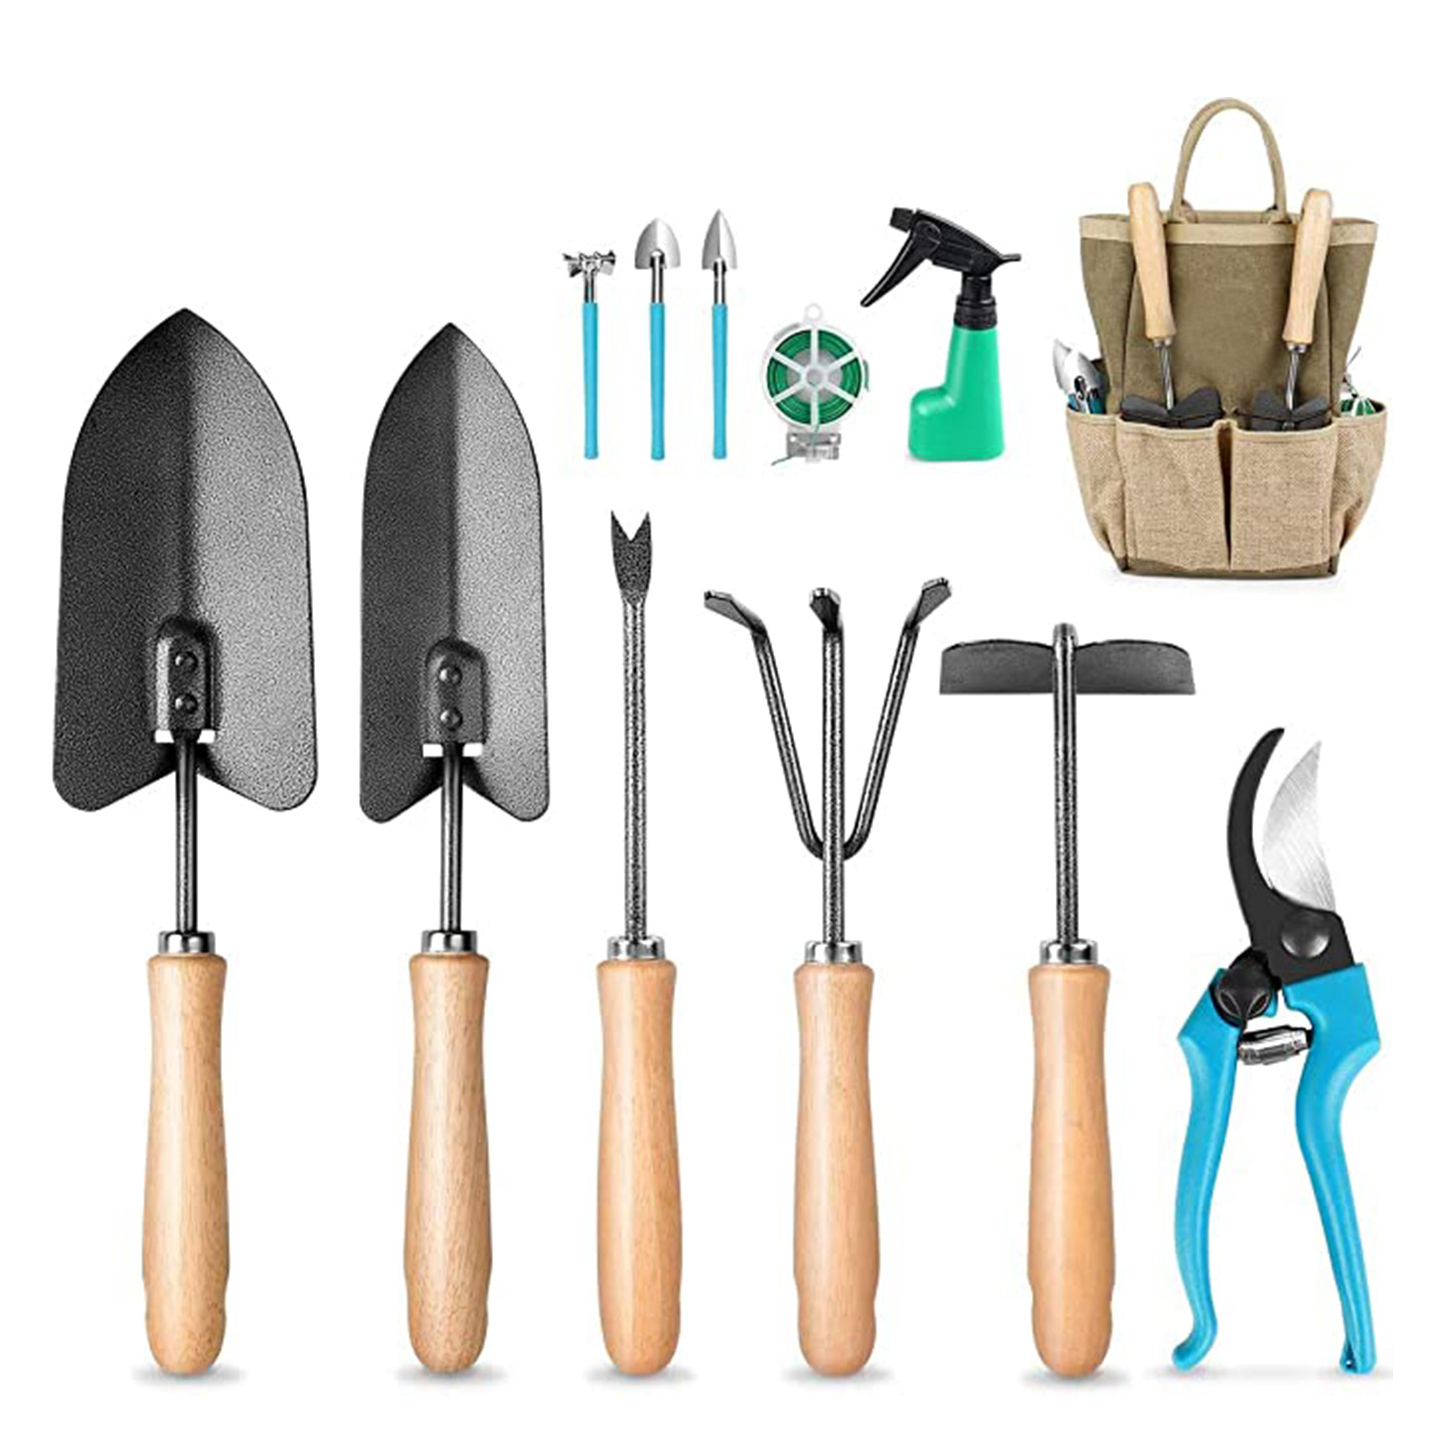 Factory wholesale Garden Trimming Shears - 12PCS Garden Tools with Cloth Bag – MACHINERY TOOLS